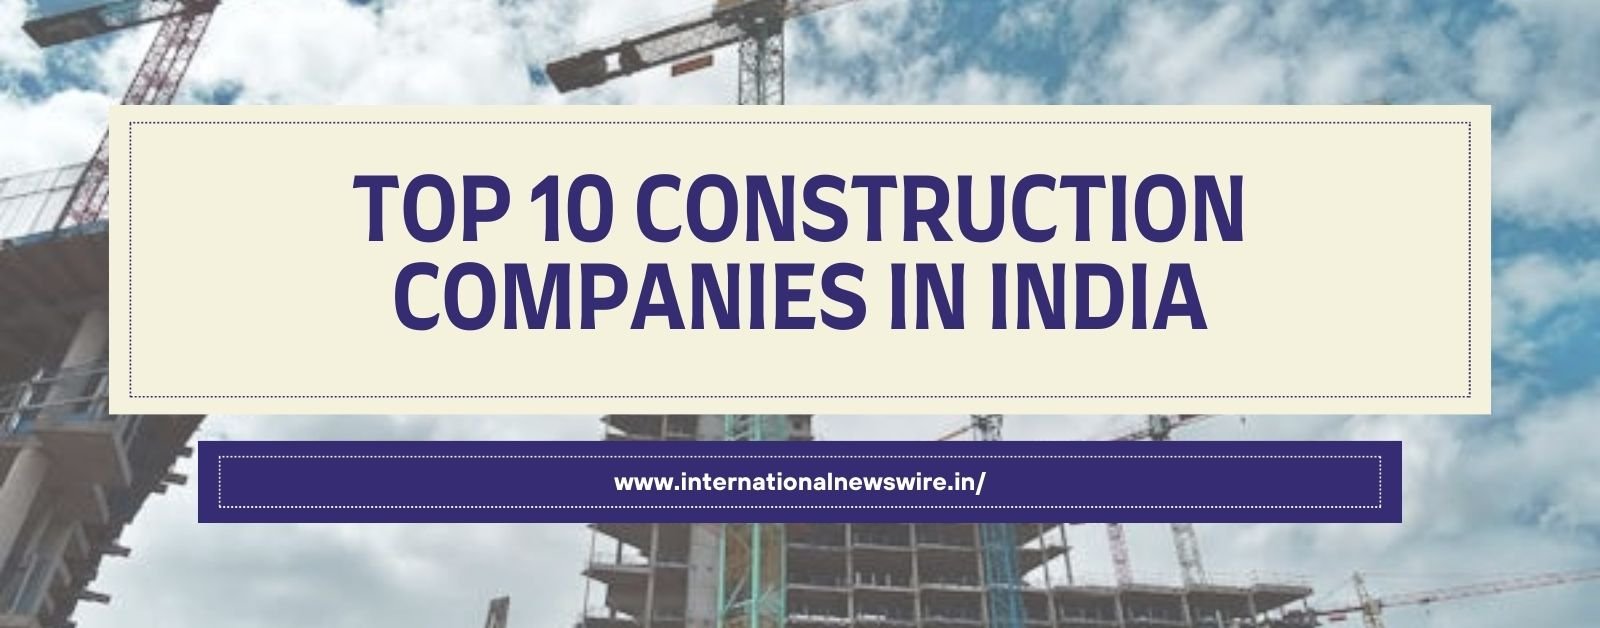 Top 10 construction companies in India